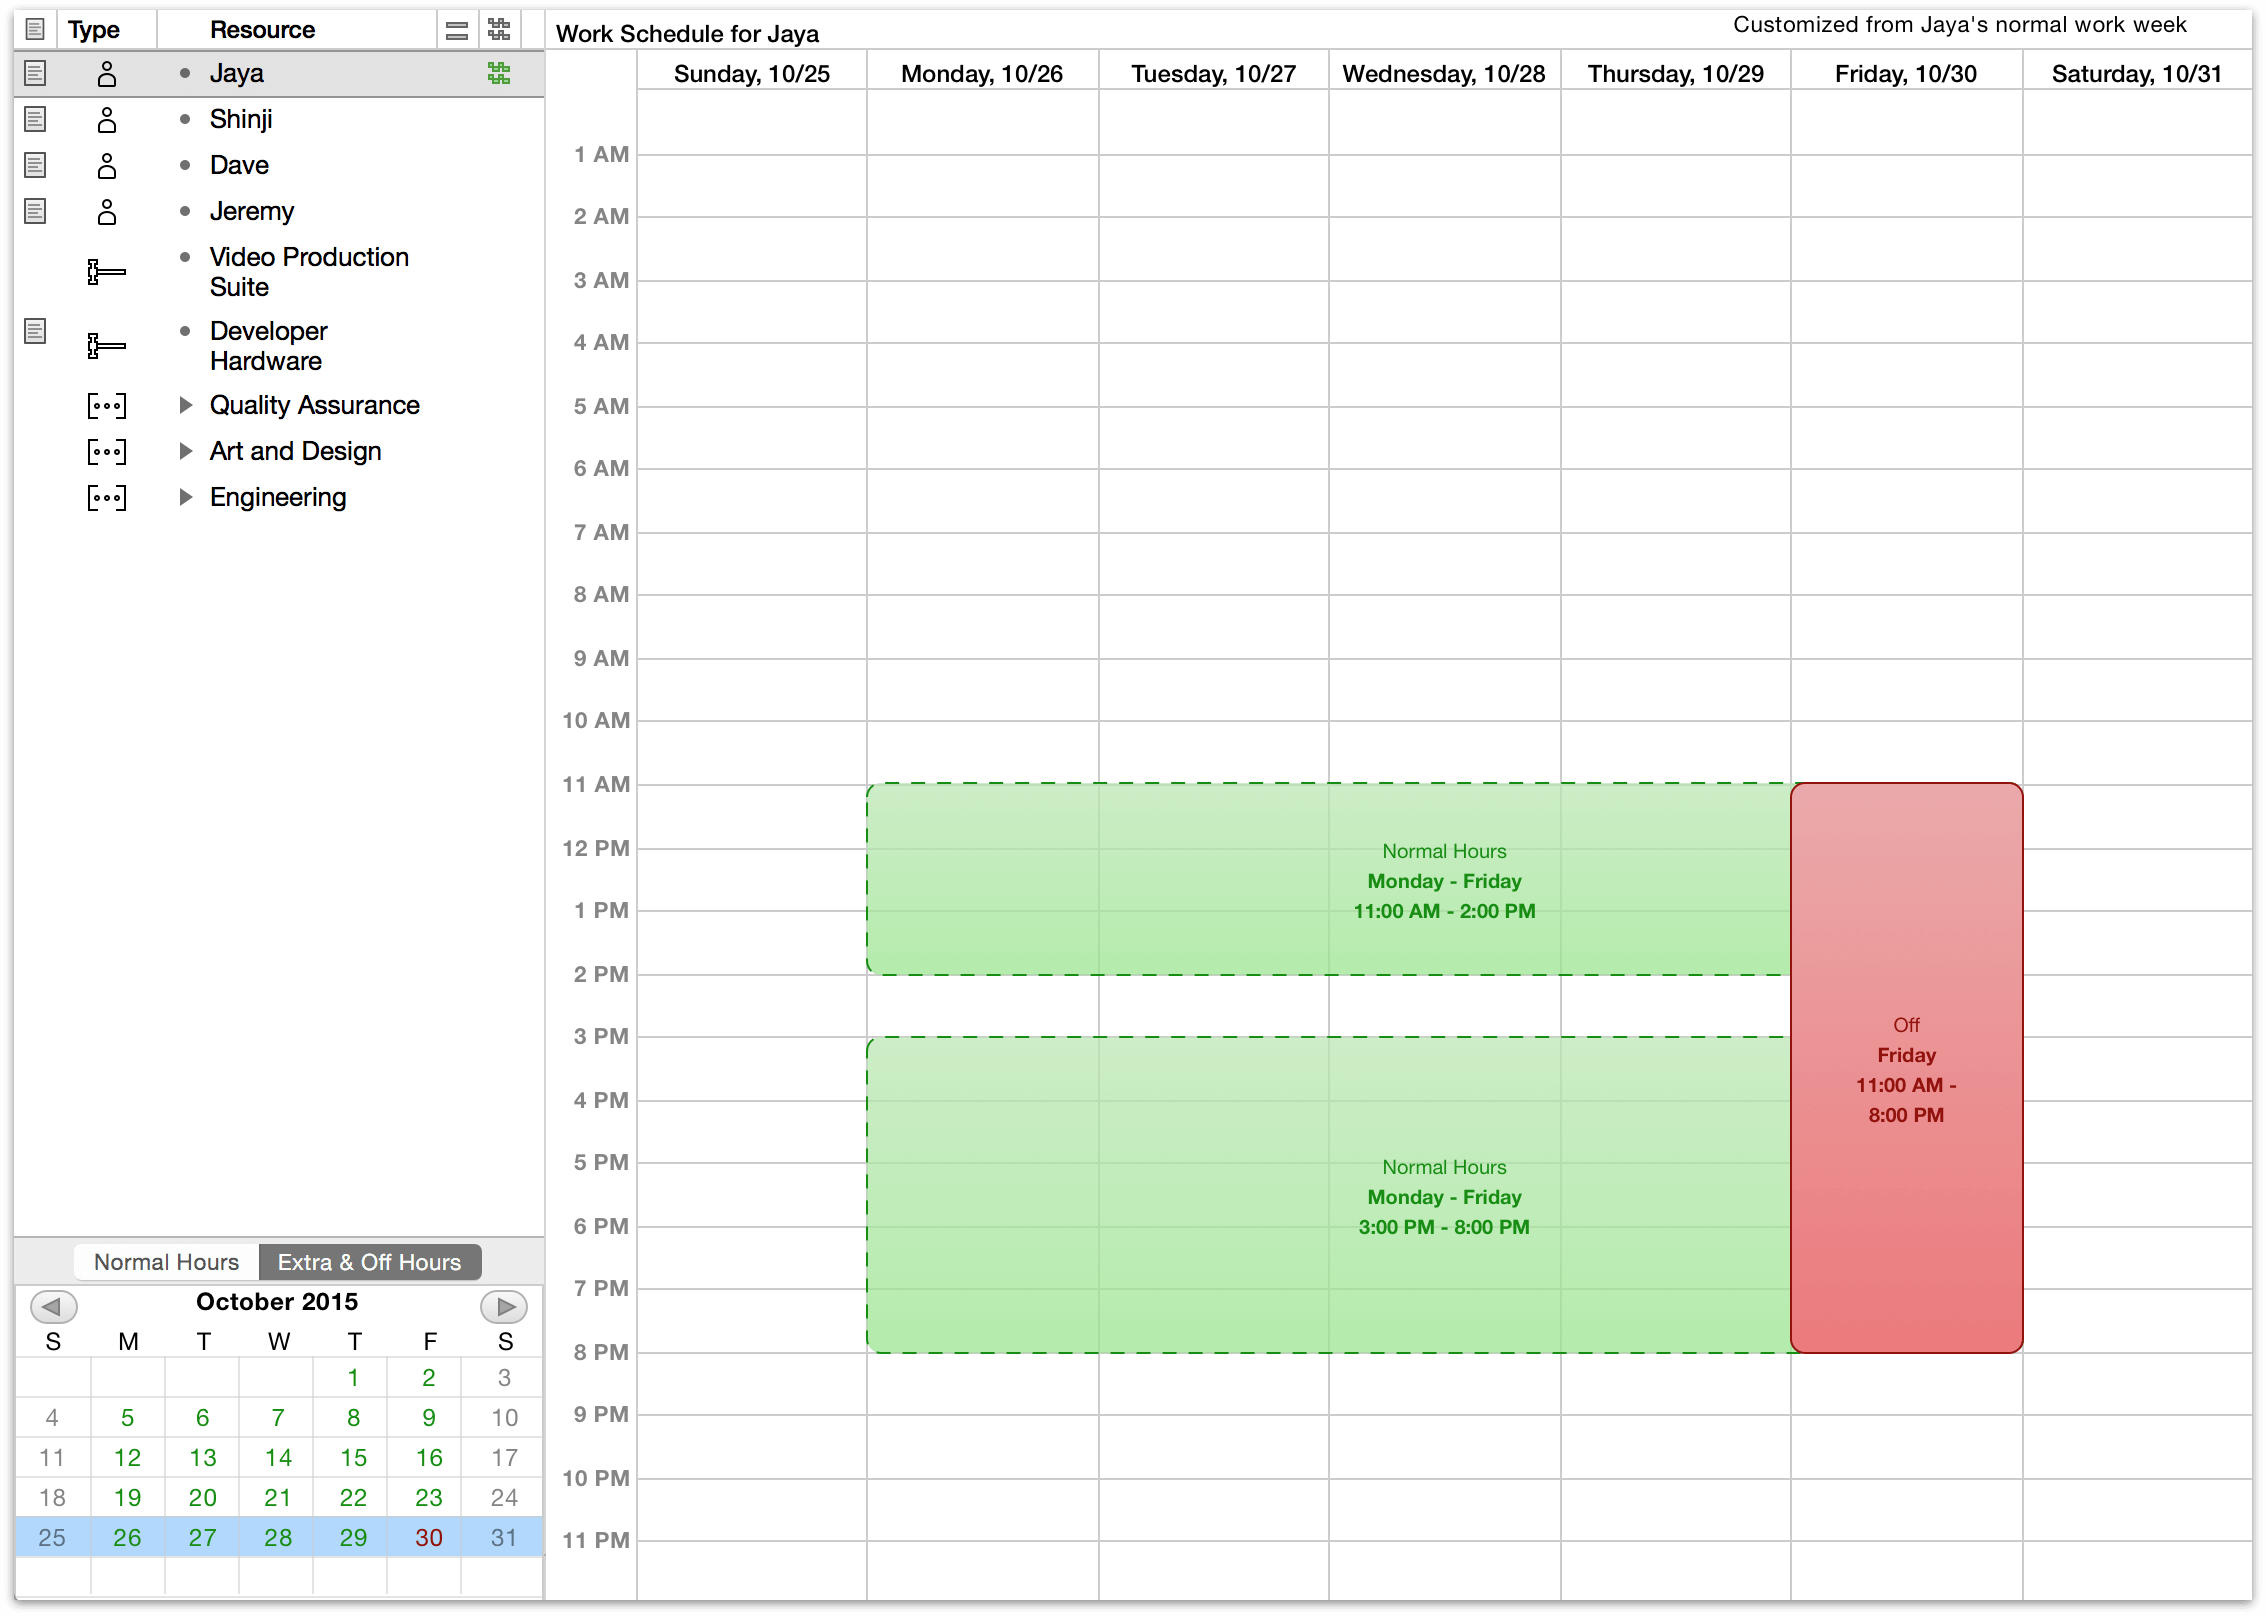 Editing the schedule exceptions for a single resource.